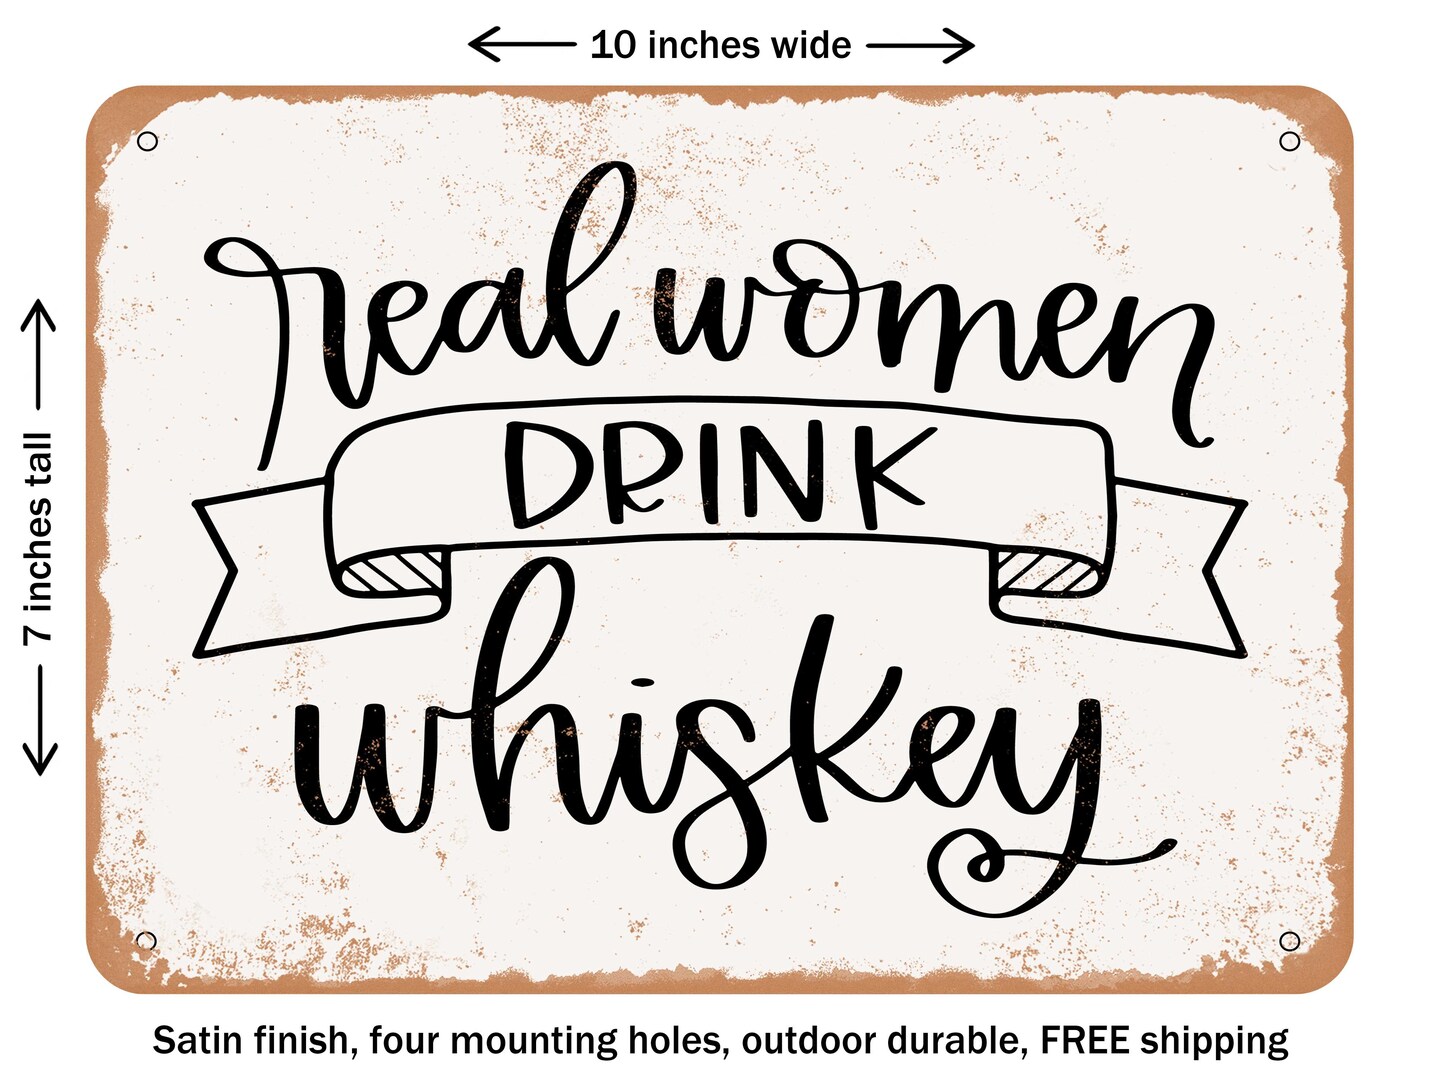 DECORATIVE METAL SIGN - Real Women Drink Whiskey - Vintage Rusty Look